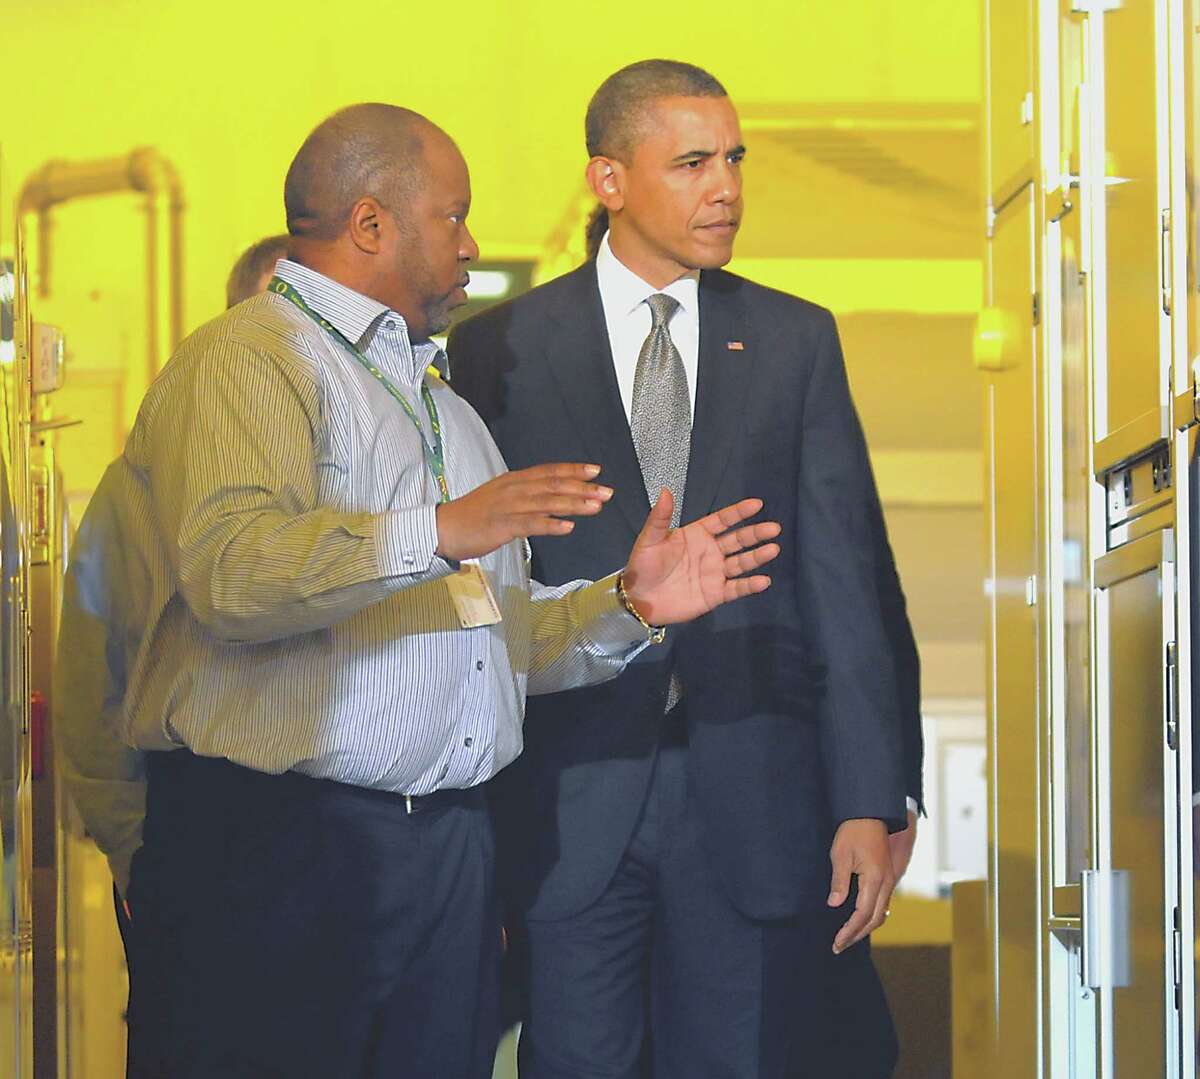 Warren Montgomery, left, CNSE assistant vice president of advanced technology and business development talks with President Barack Obama, right, as he tours a clean room on Tuesday, May 8, 2012, at University at Albany College of Nanoscale Science and Engineering in Albany, N.Y. (Cindy Schultz / Times Union)